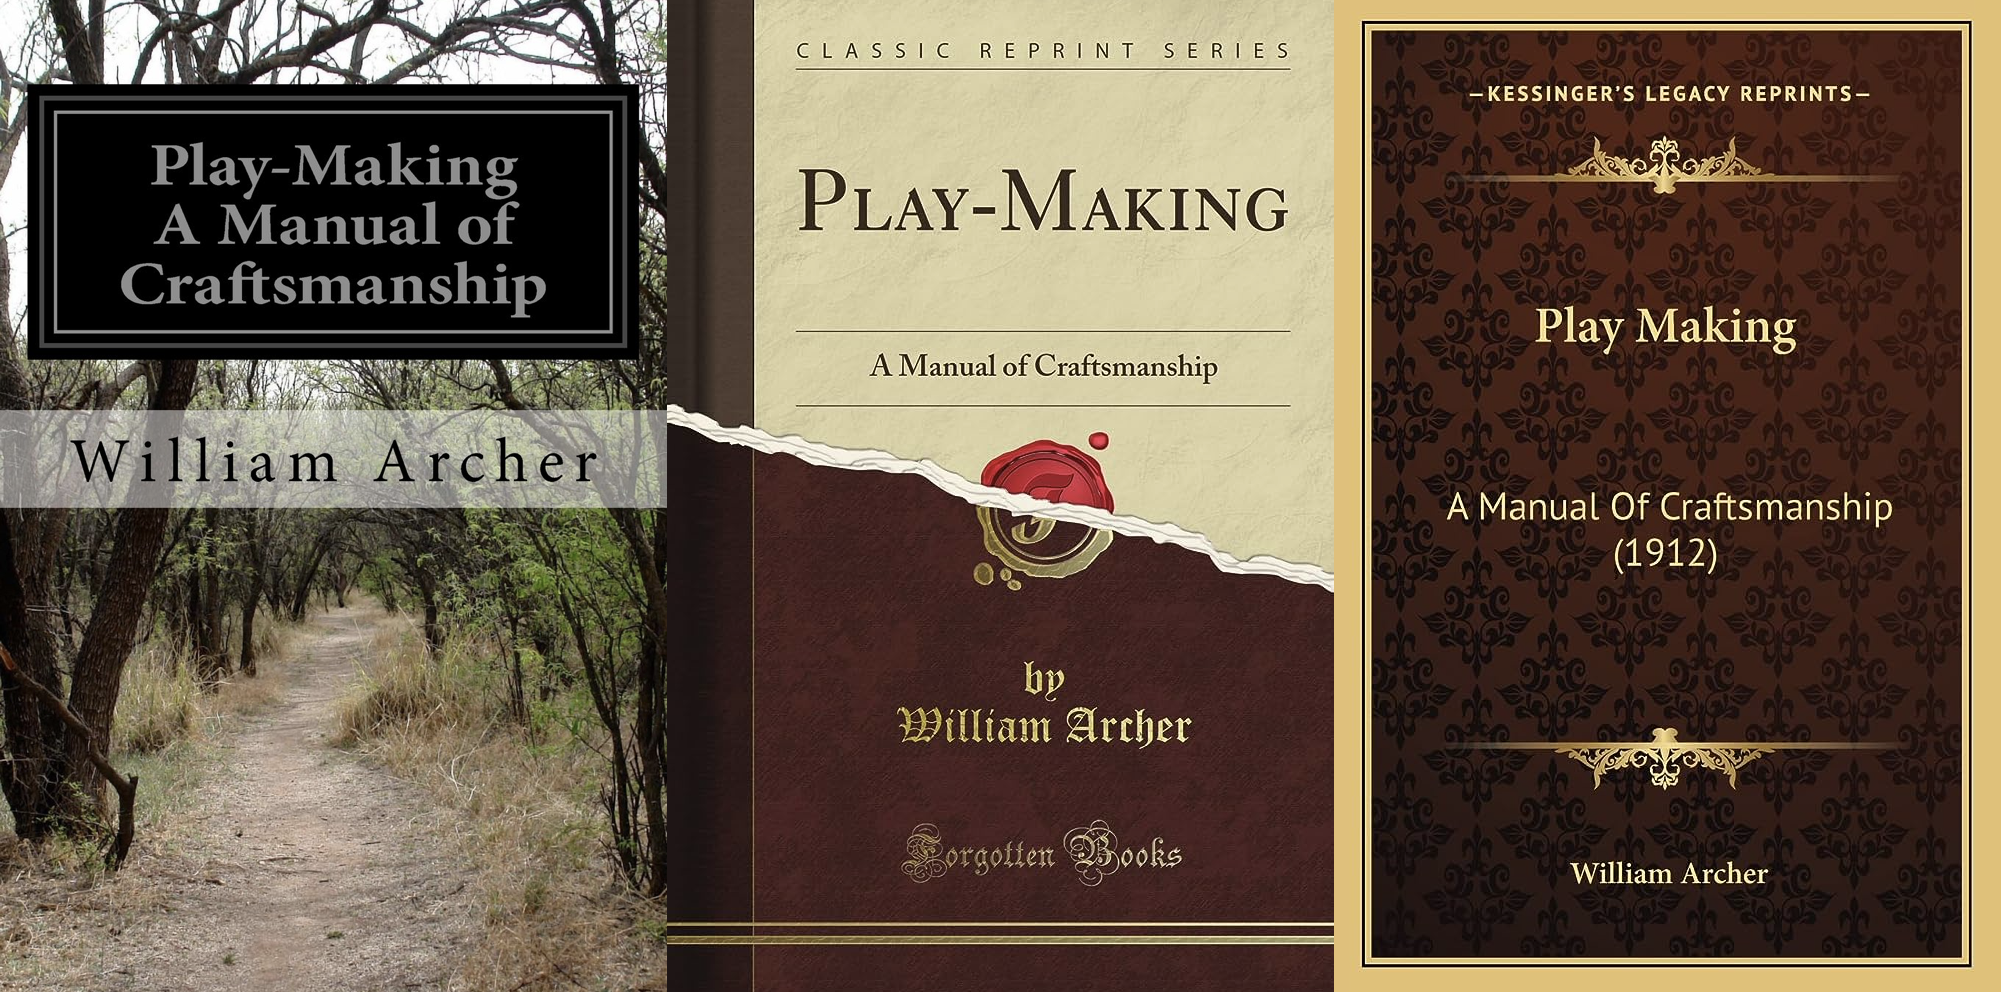 3 Play-Making covers (By William Archer)